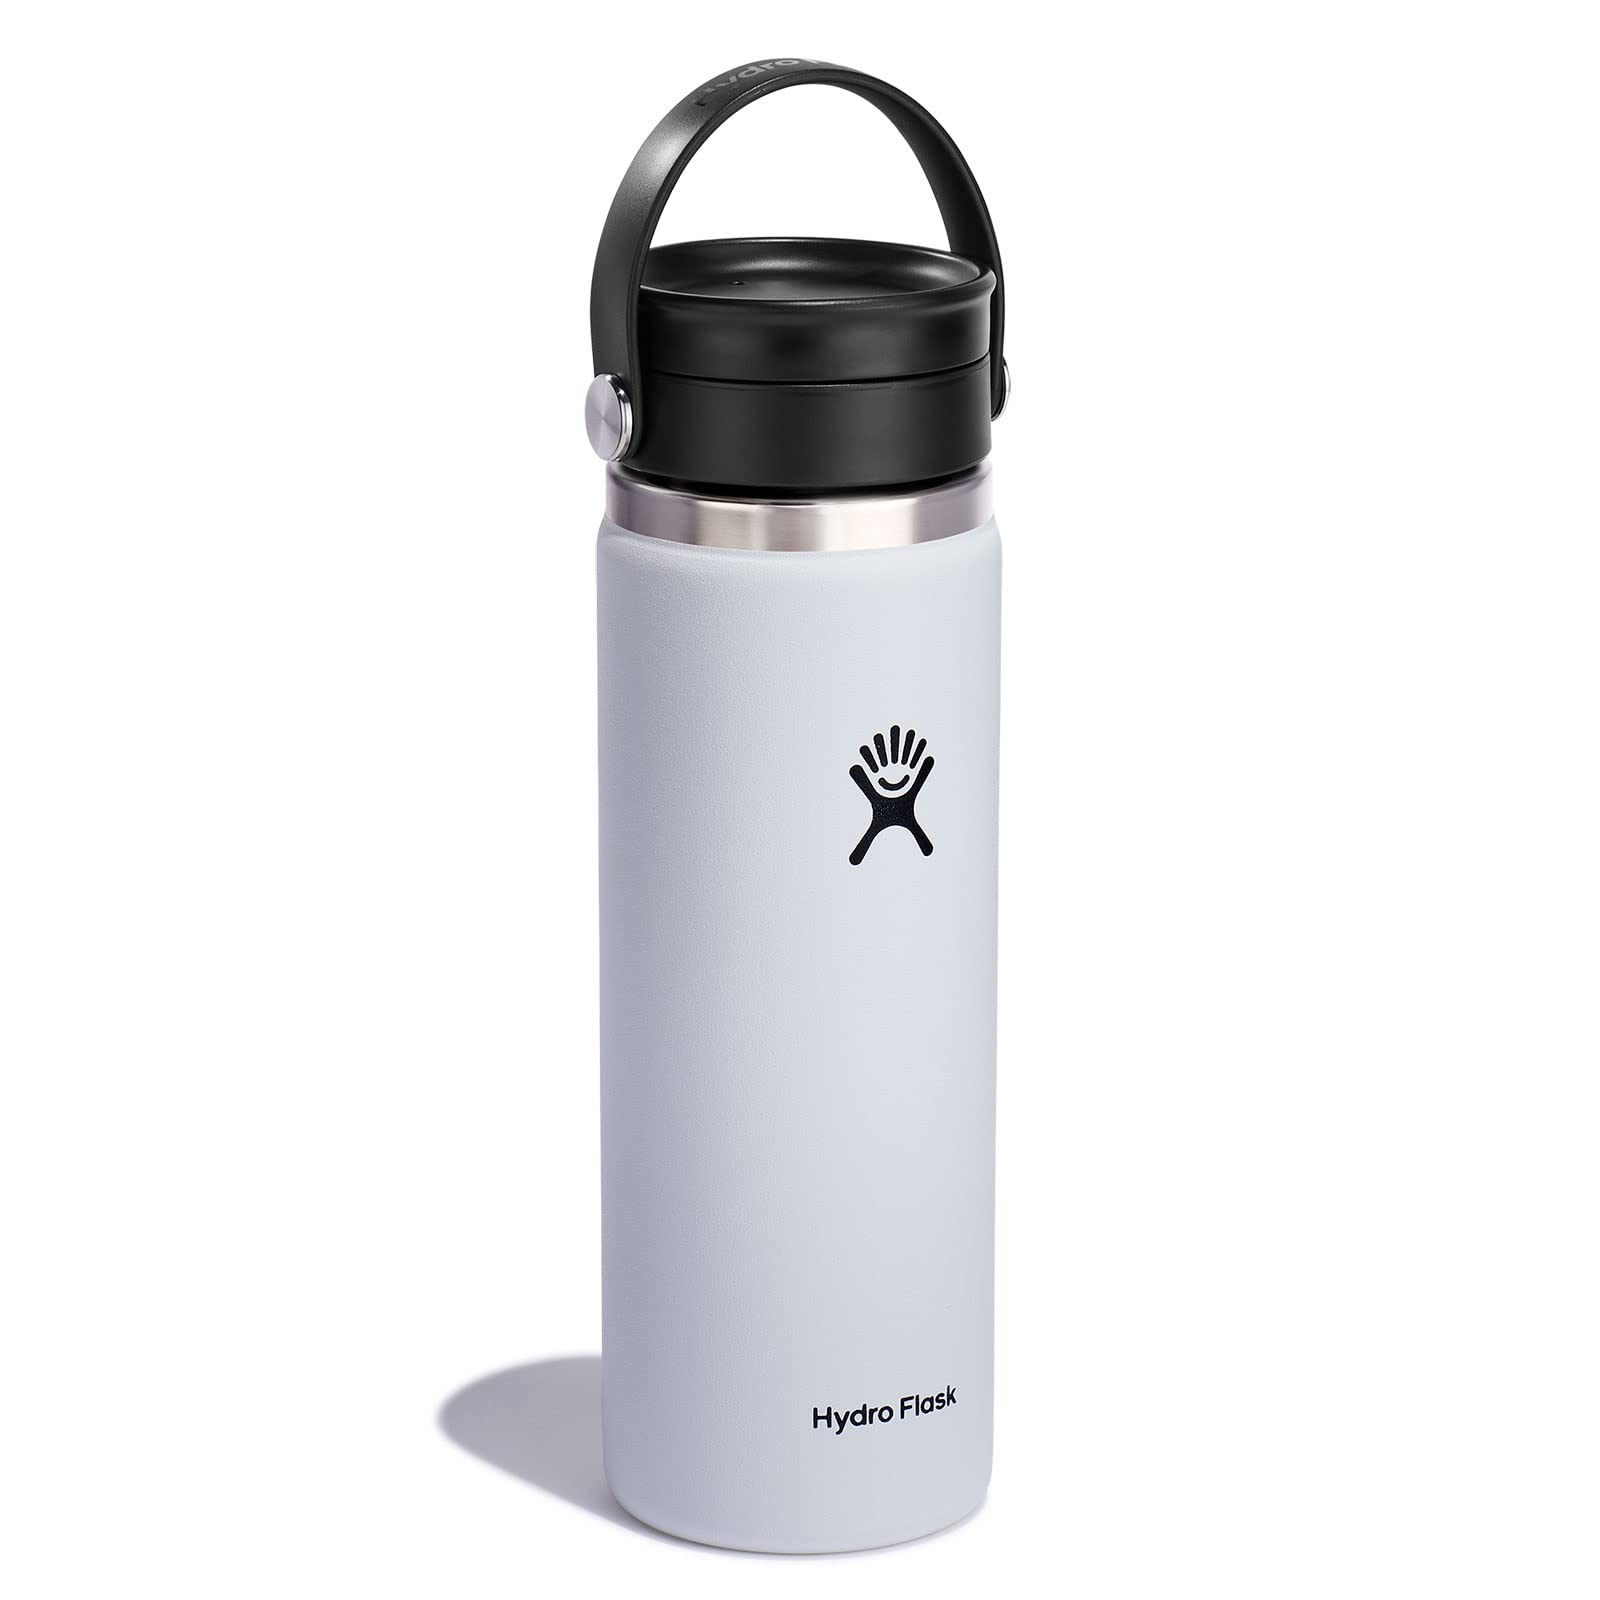 20-Ounce Hydro Flask Wide Mouth Bottle w/ Flex Sip Lid (White) $16.12 + Free Shipping w/ Prime or on orders over $25